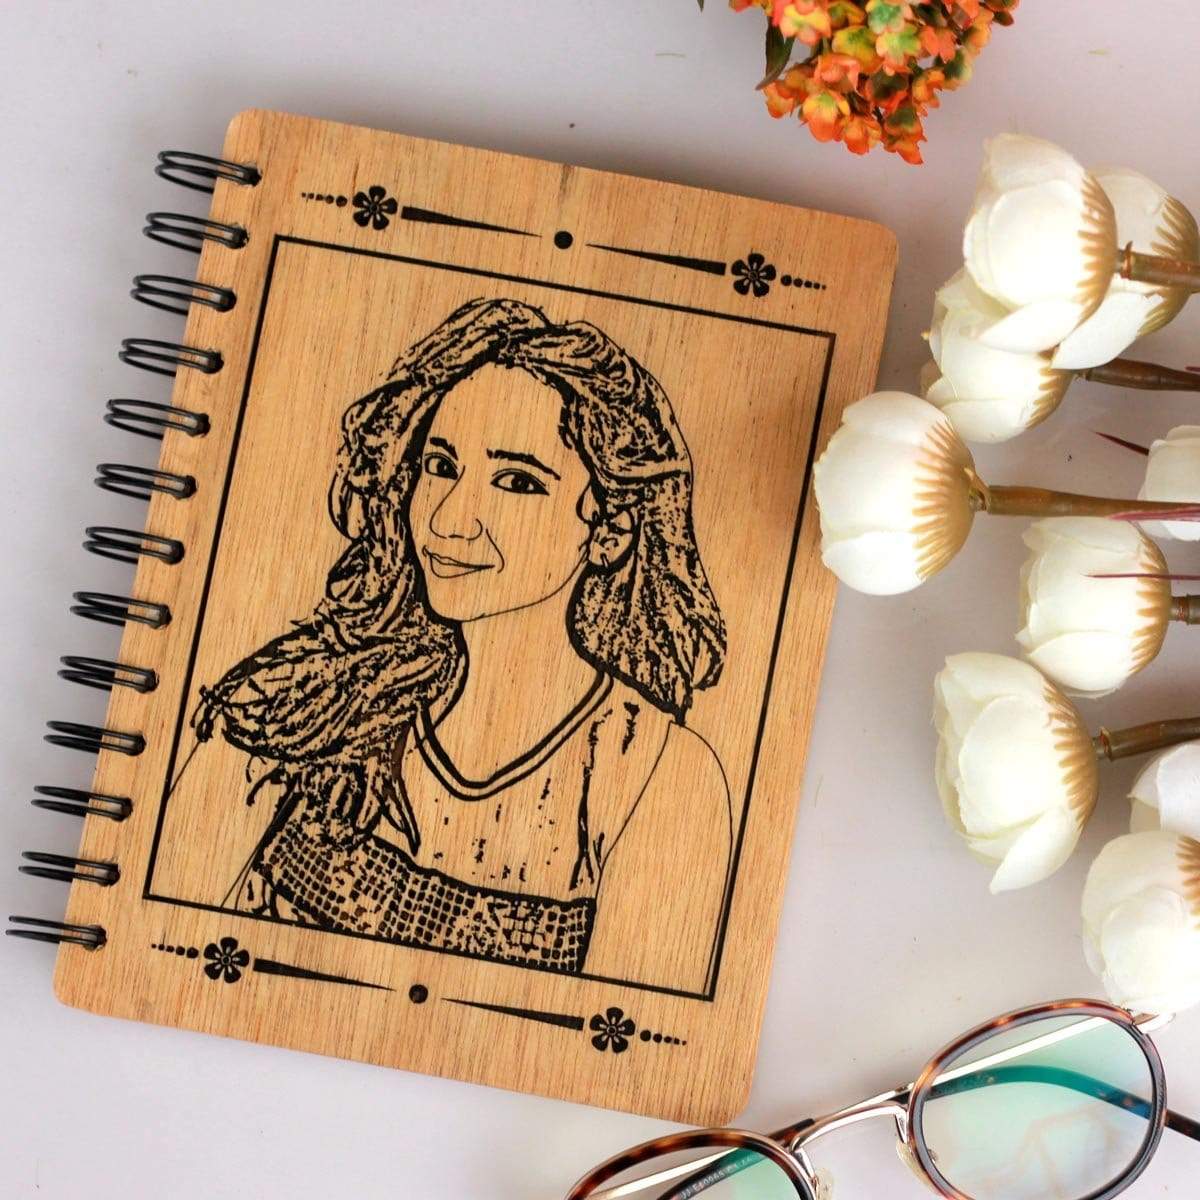 Custom Wooden Notebook For Teachers Personalized With A Photo | This Diary With Photo Makes The Best Teacher Appreciation Gifts | Looking For Personalized Teacher Gifts ? Buy Teacher's Day Gifts, Farewell Gifts For Teachers, Or Birthday Gift Ideas For Teachers From The Woodgeek Store.